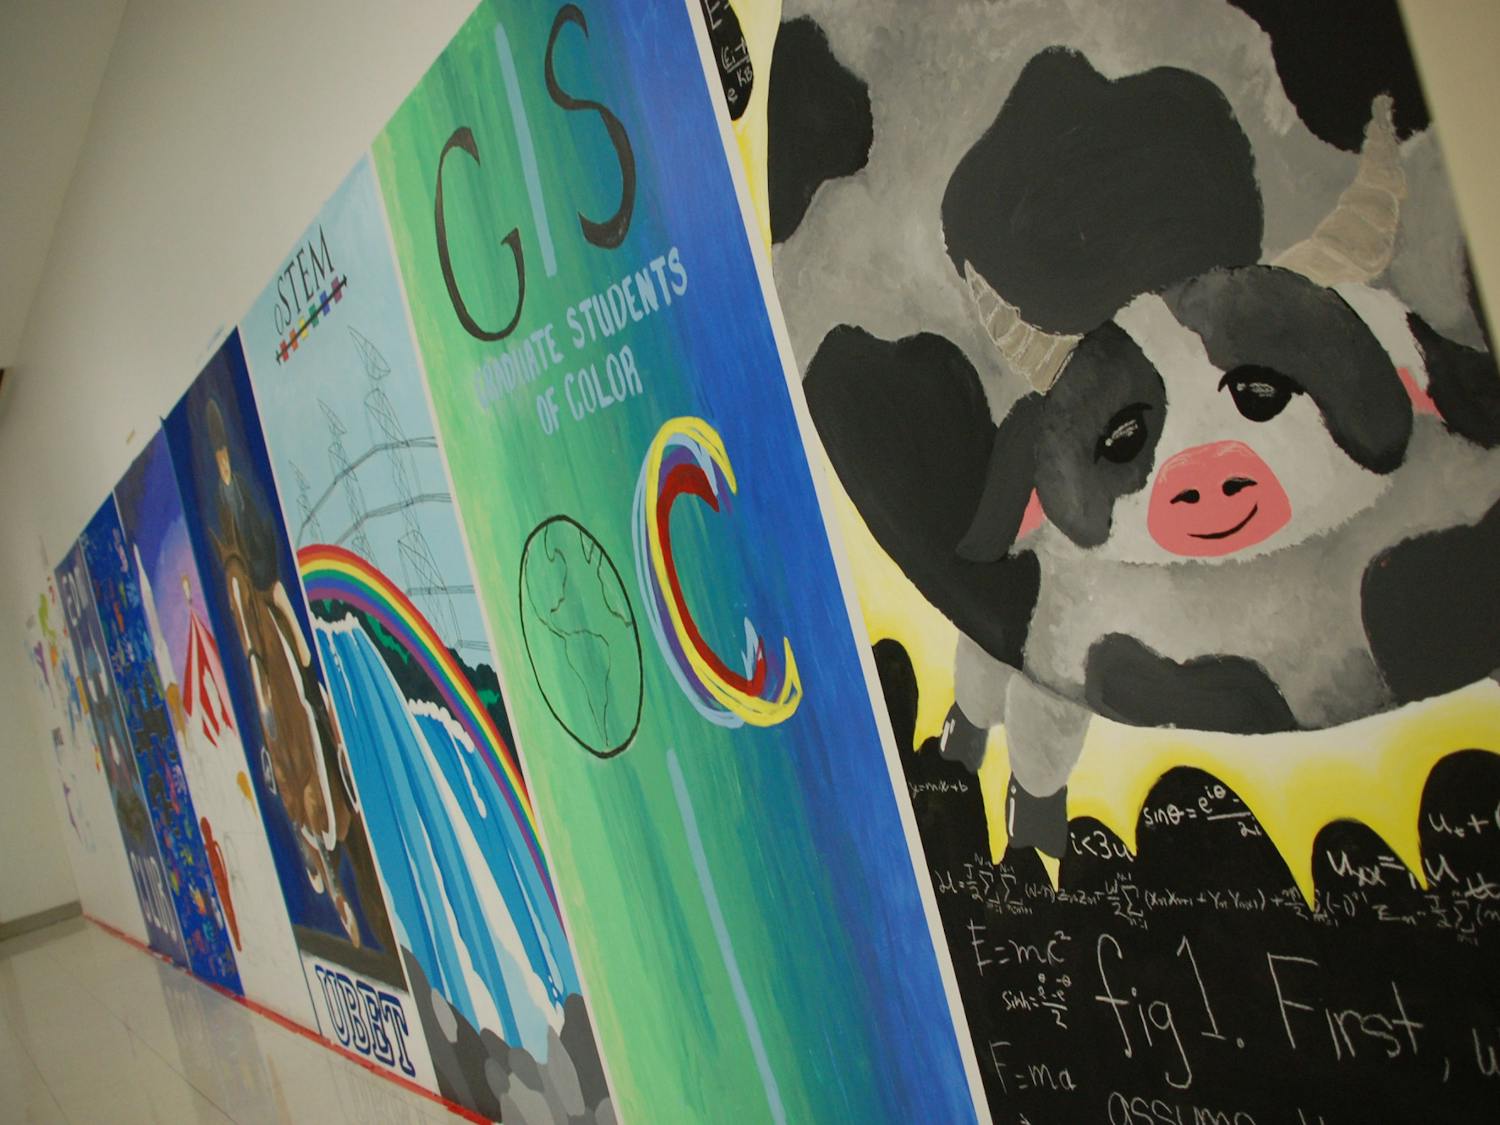 The mural painting competition was held to “infuse UB pride and spirit back into the Student Union” during renovations.&nbsp;